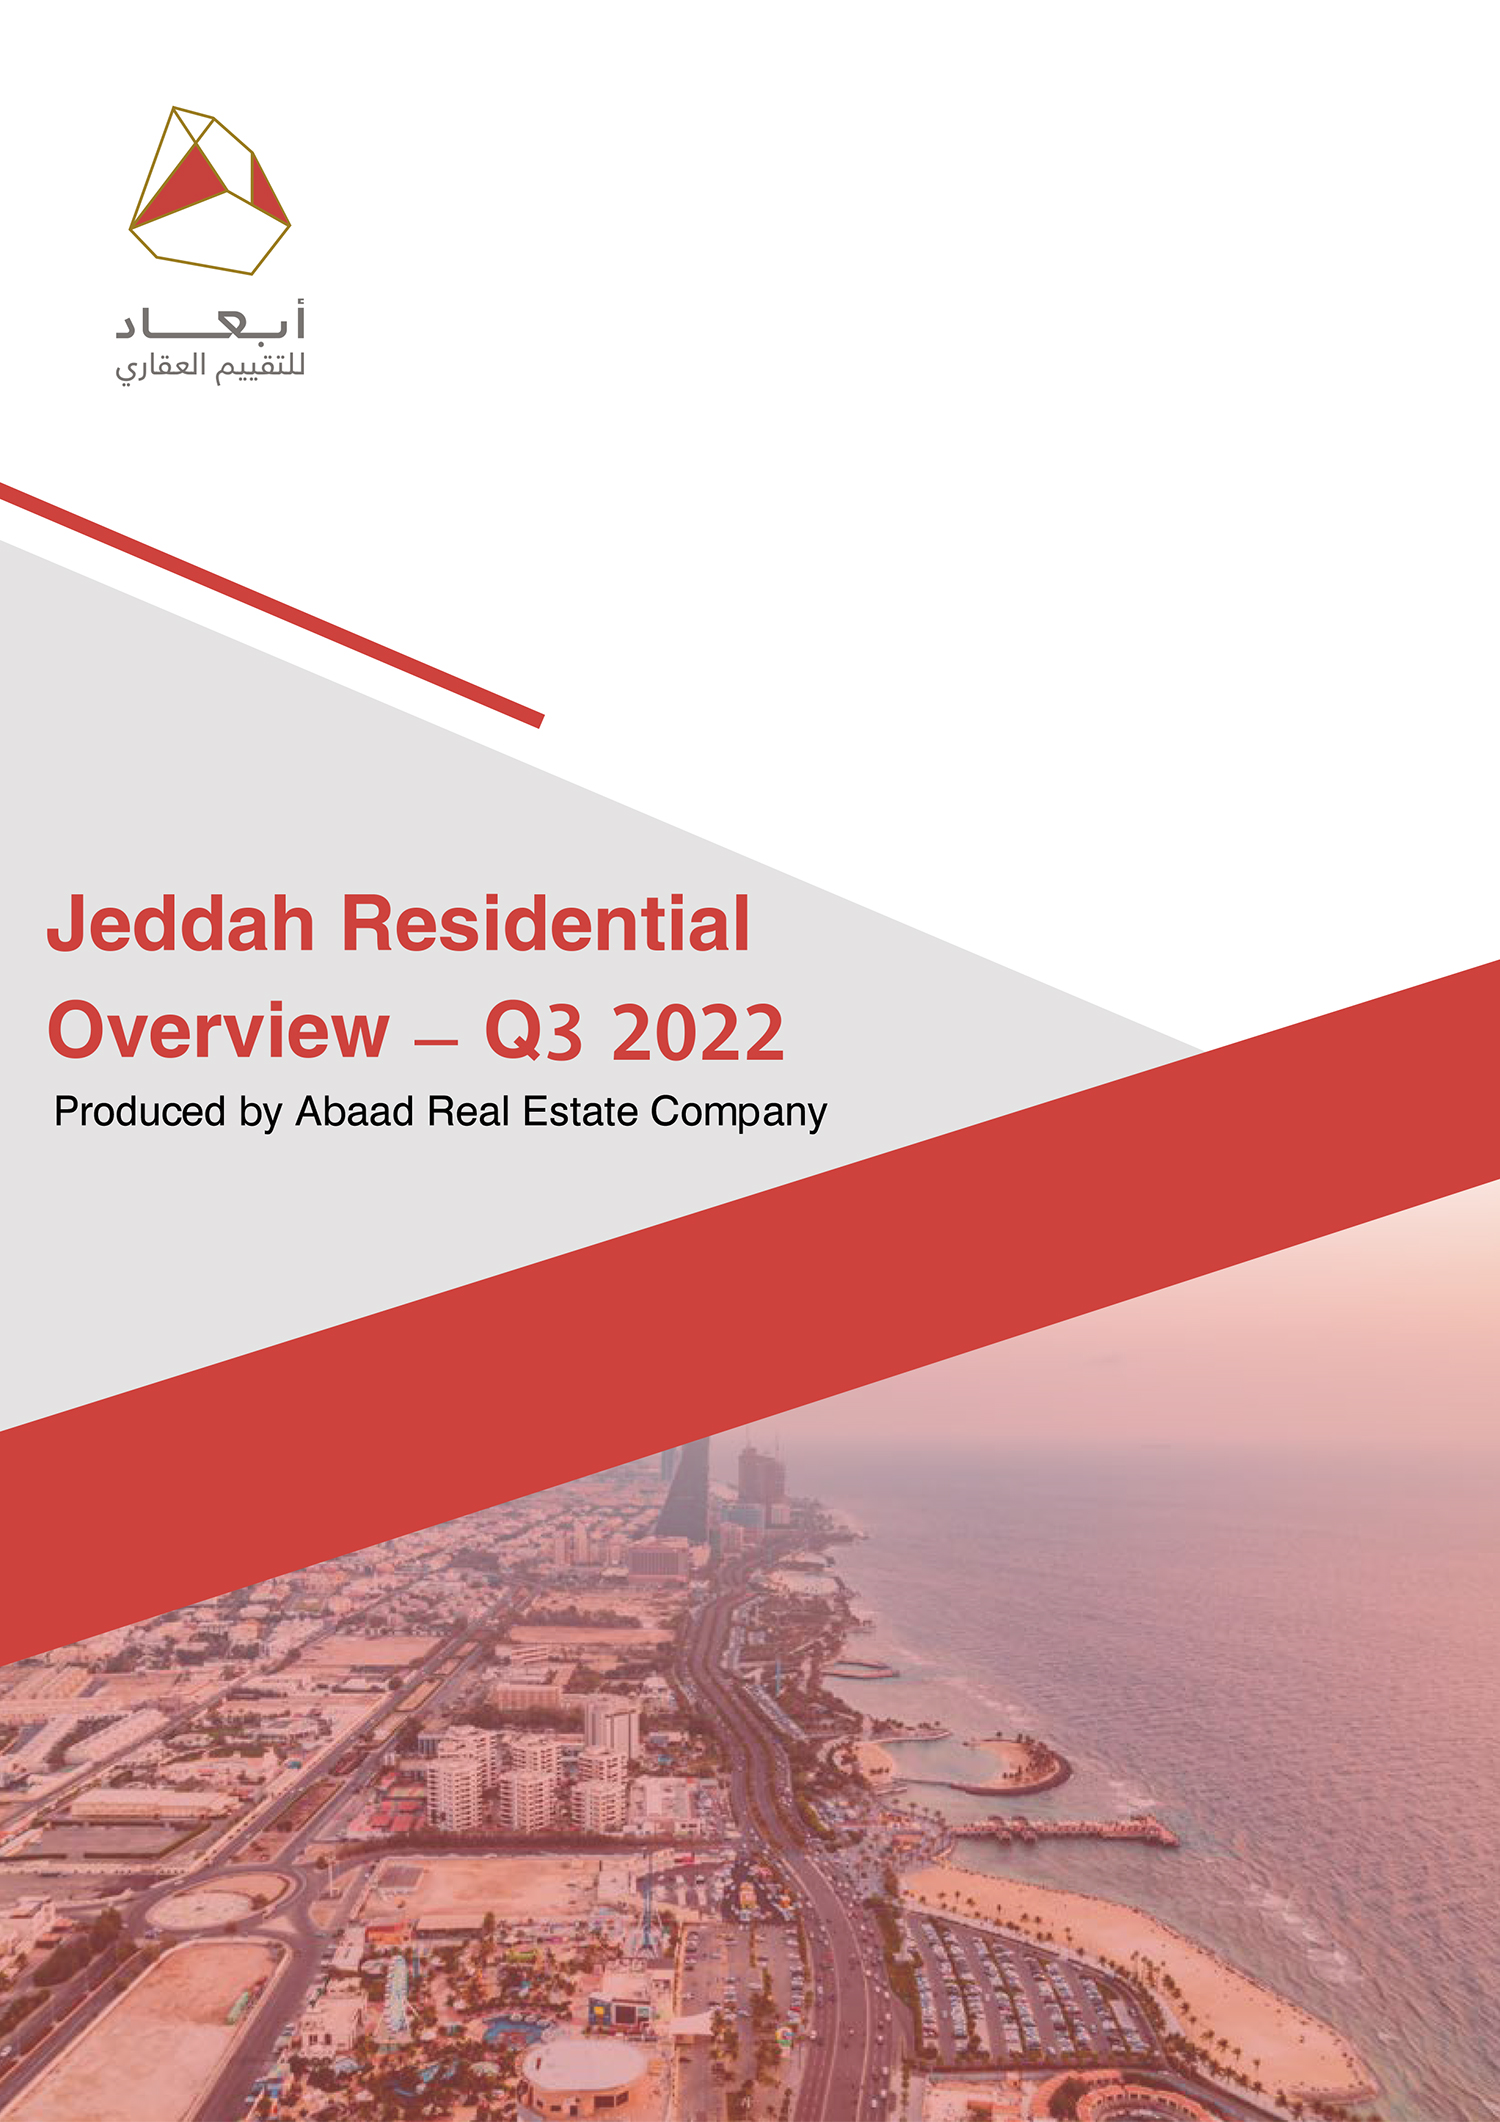 Jeddah_Residential_Land_Overview_Q3_2022_1673415763-1